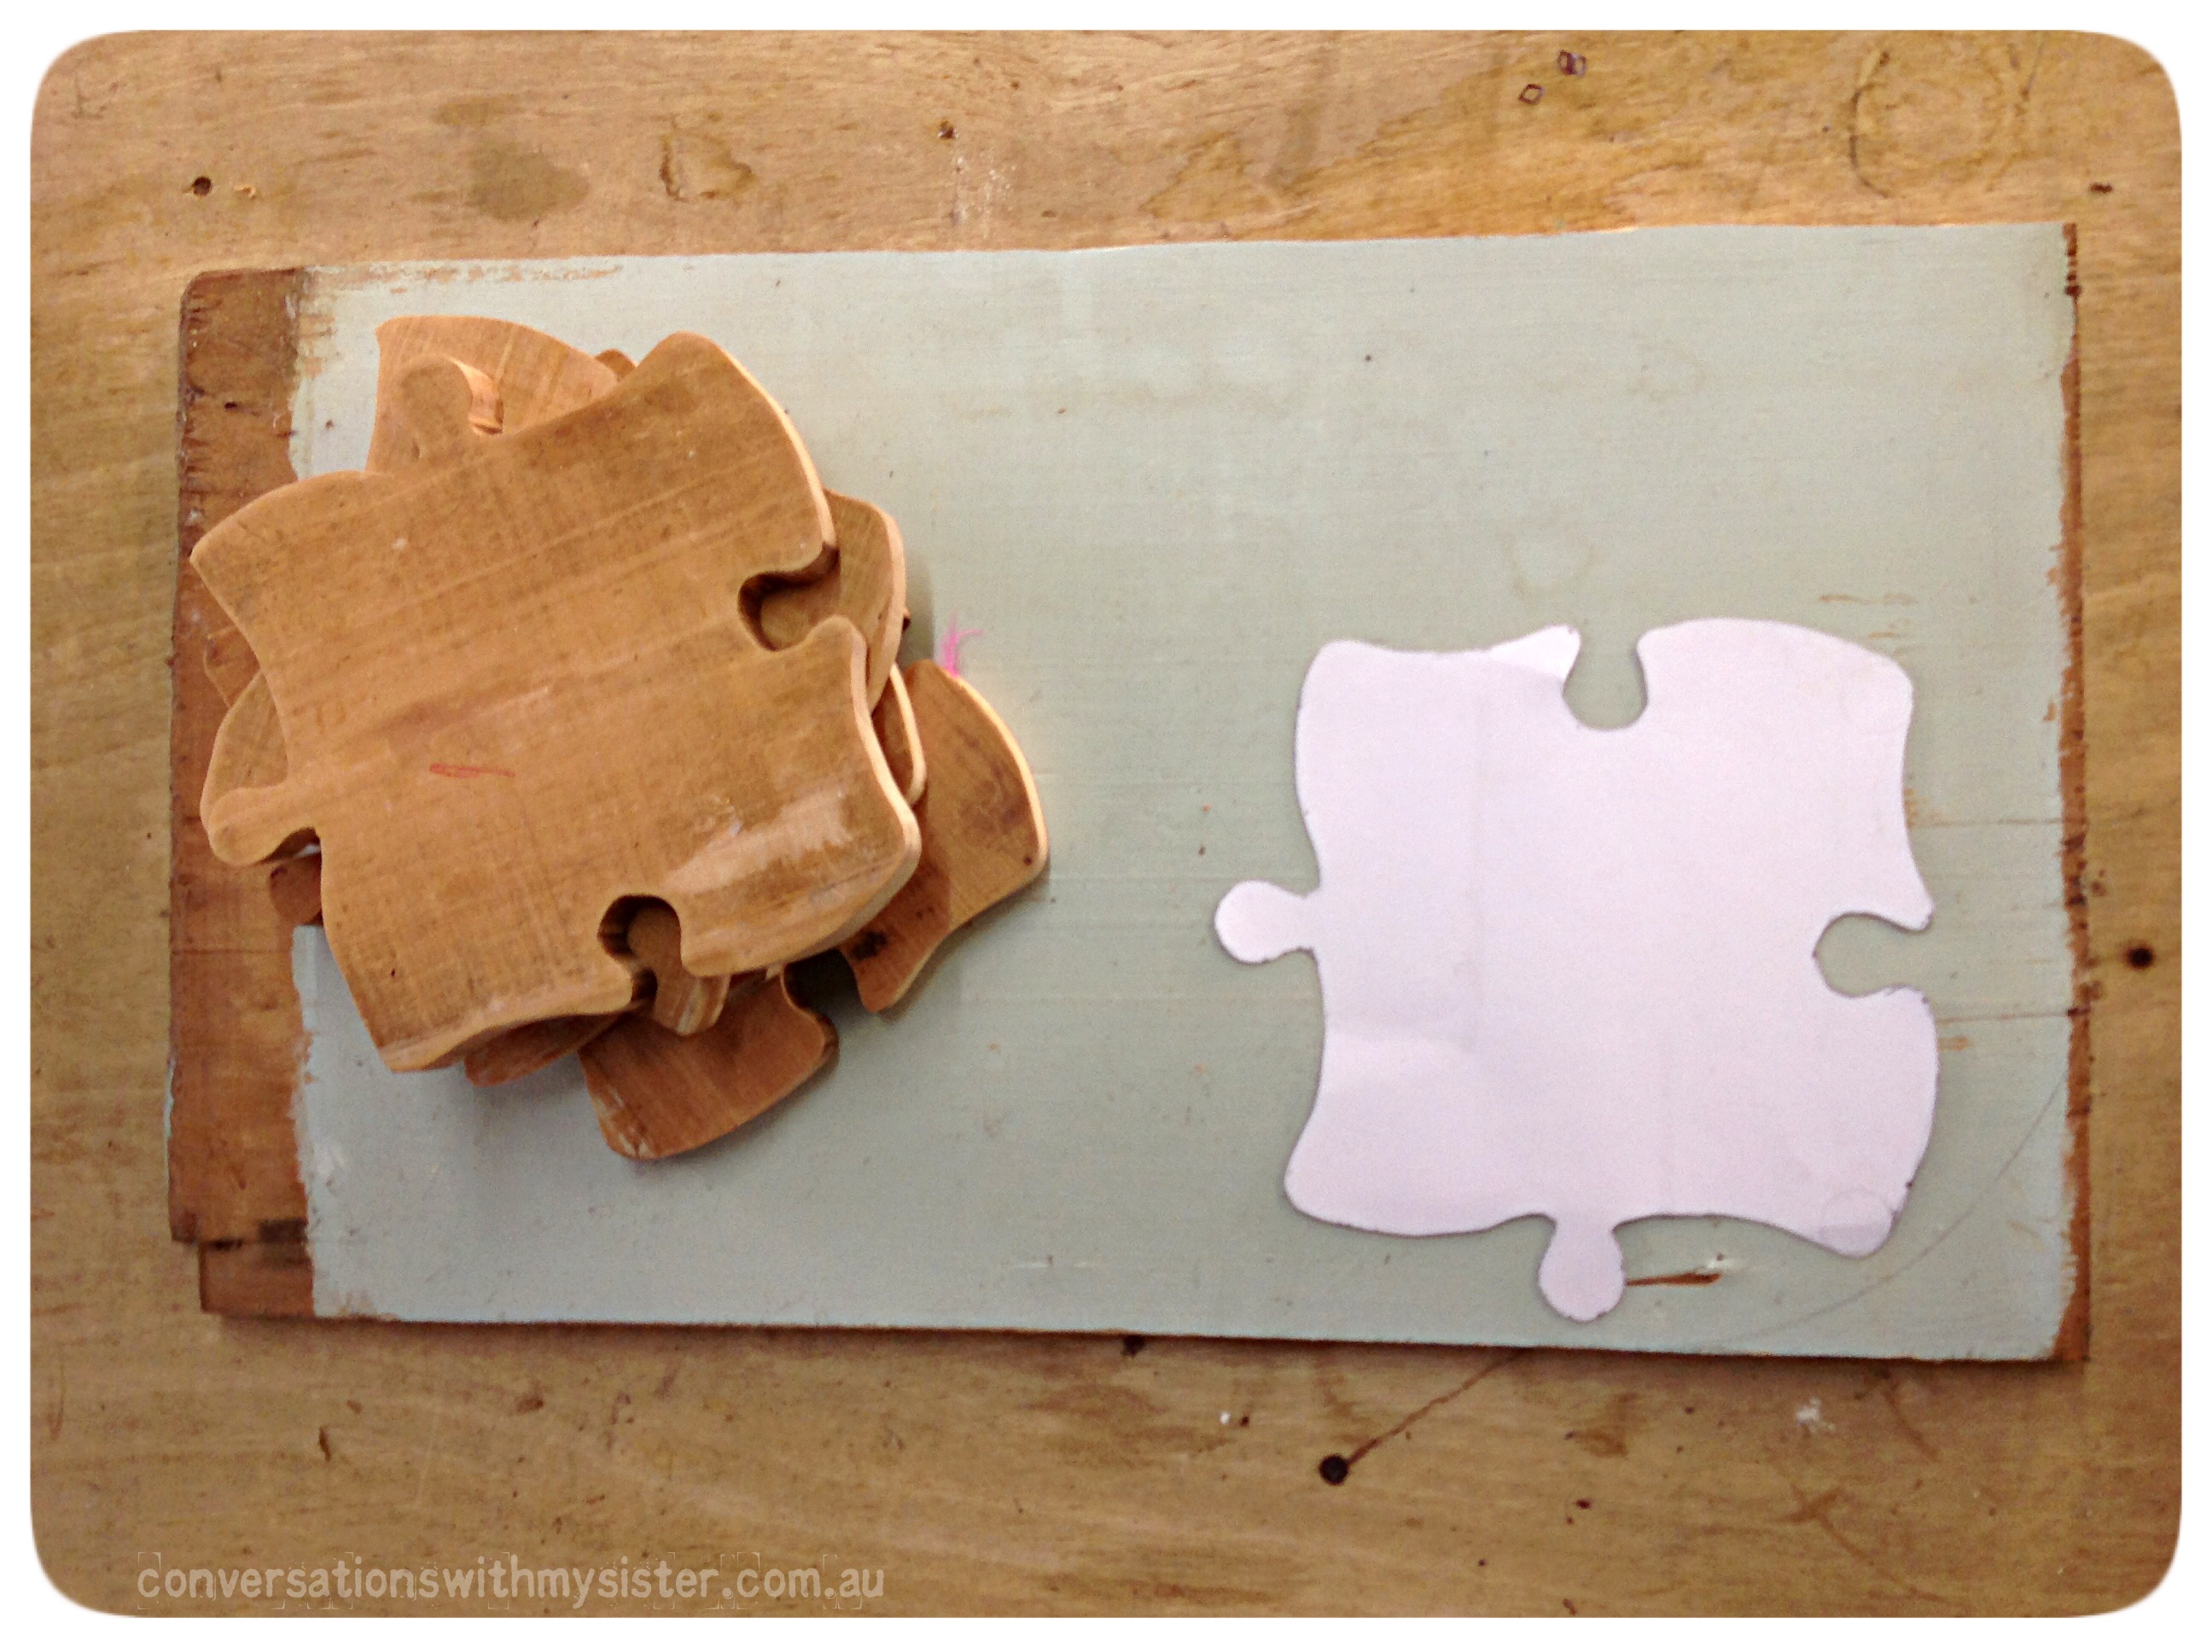 This Jigsaw piece plate is a perfect example of taking something no longer needed in its original form and upcycling it into something new.